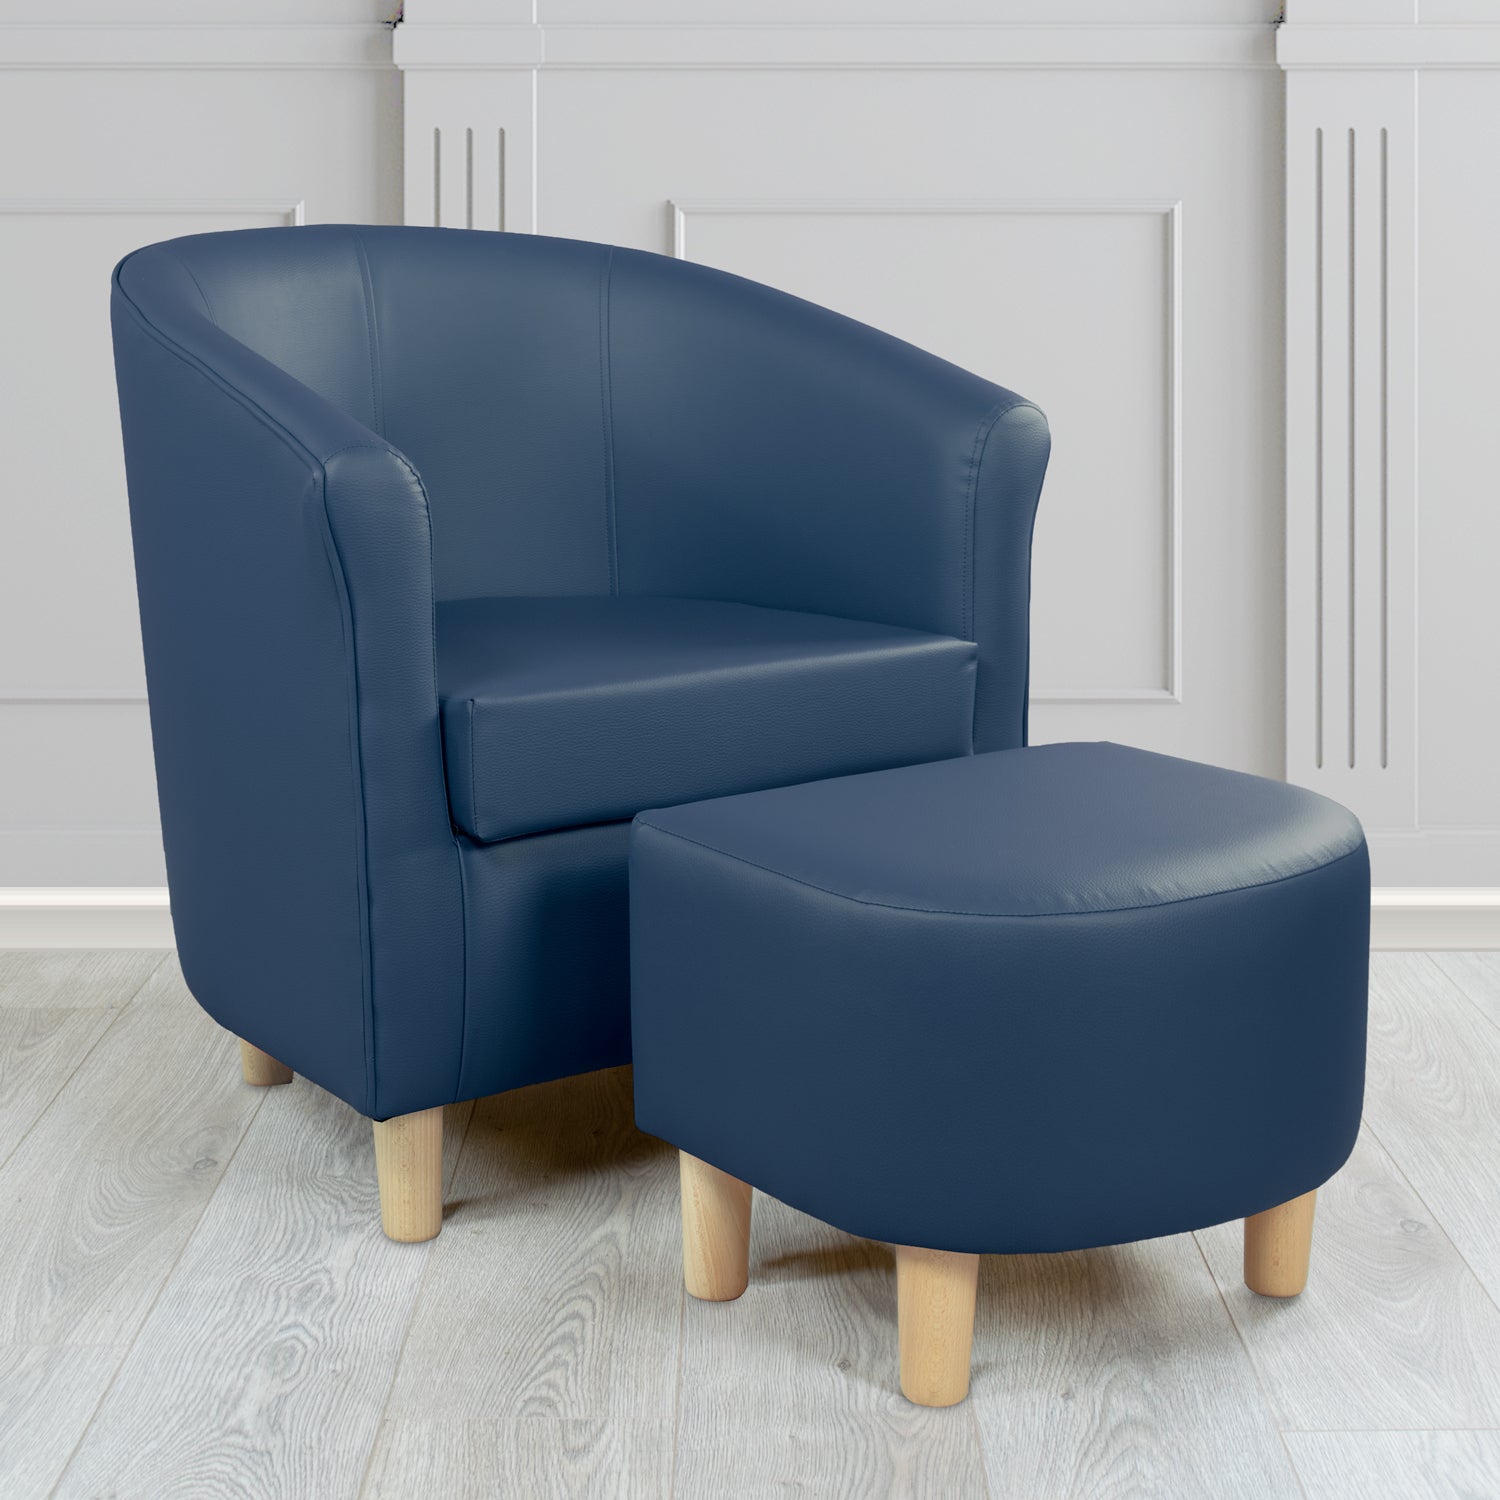 Tuscany Just Colour Sapphire Blue Faux Leather Tub Chair with Footstool Set - The Tub Chair Shop